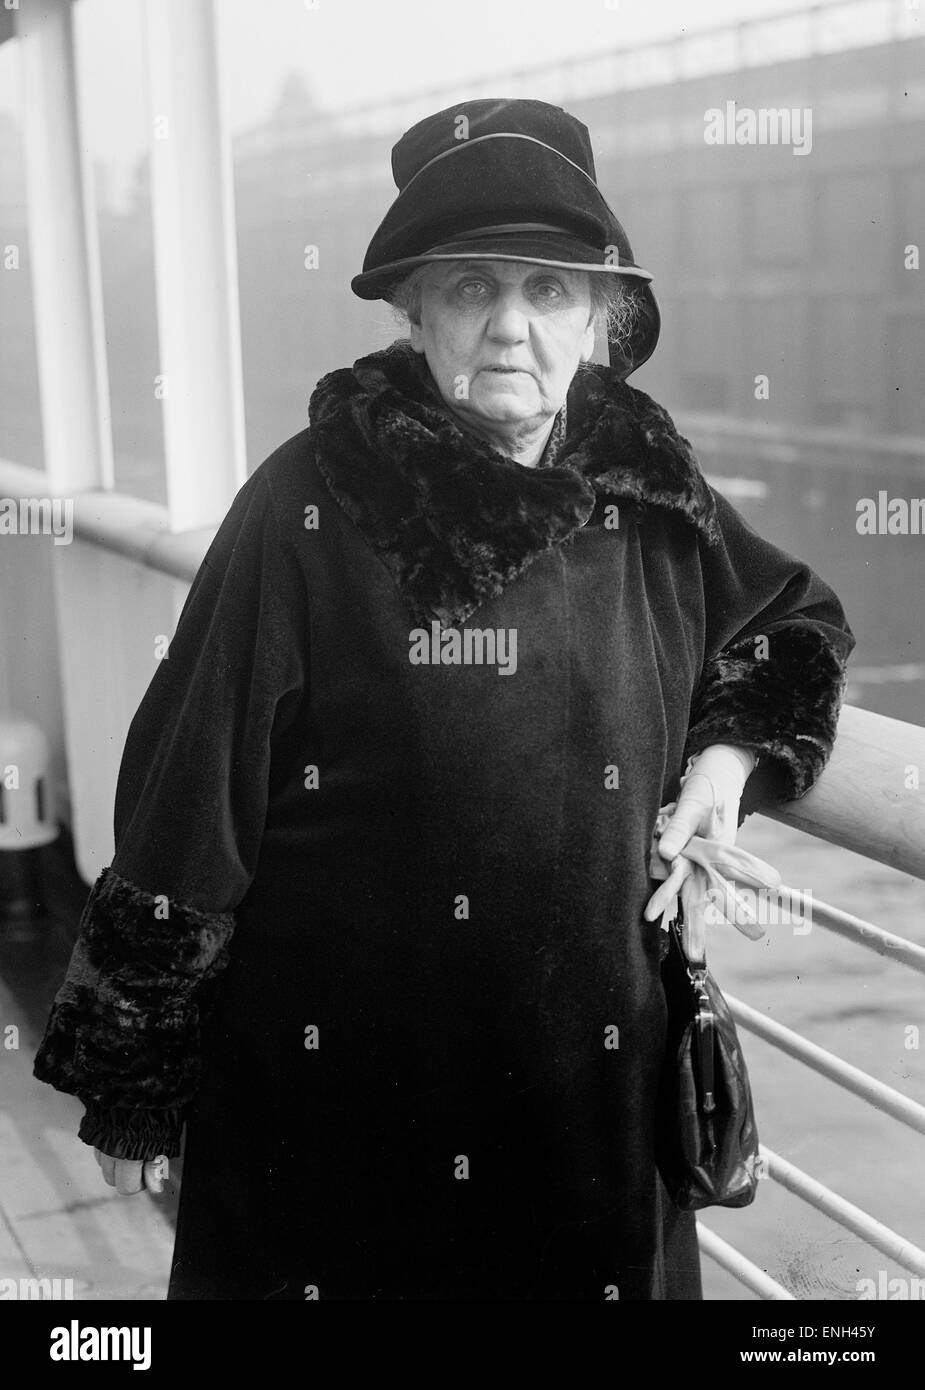 Jane Addams, pioneer American settlement social worker, public philosopher, sociologist, author, and leader in women's suffrage and world peace. Nobel Peace Prize winner in 1931 Stock Photo